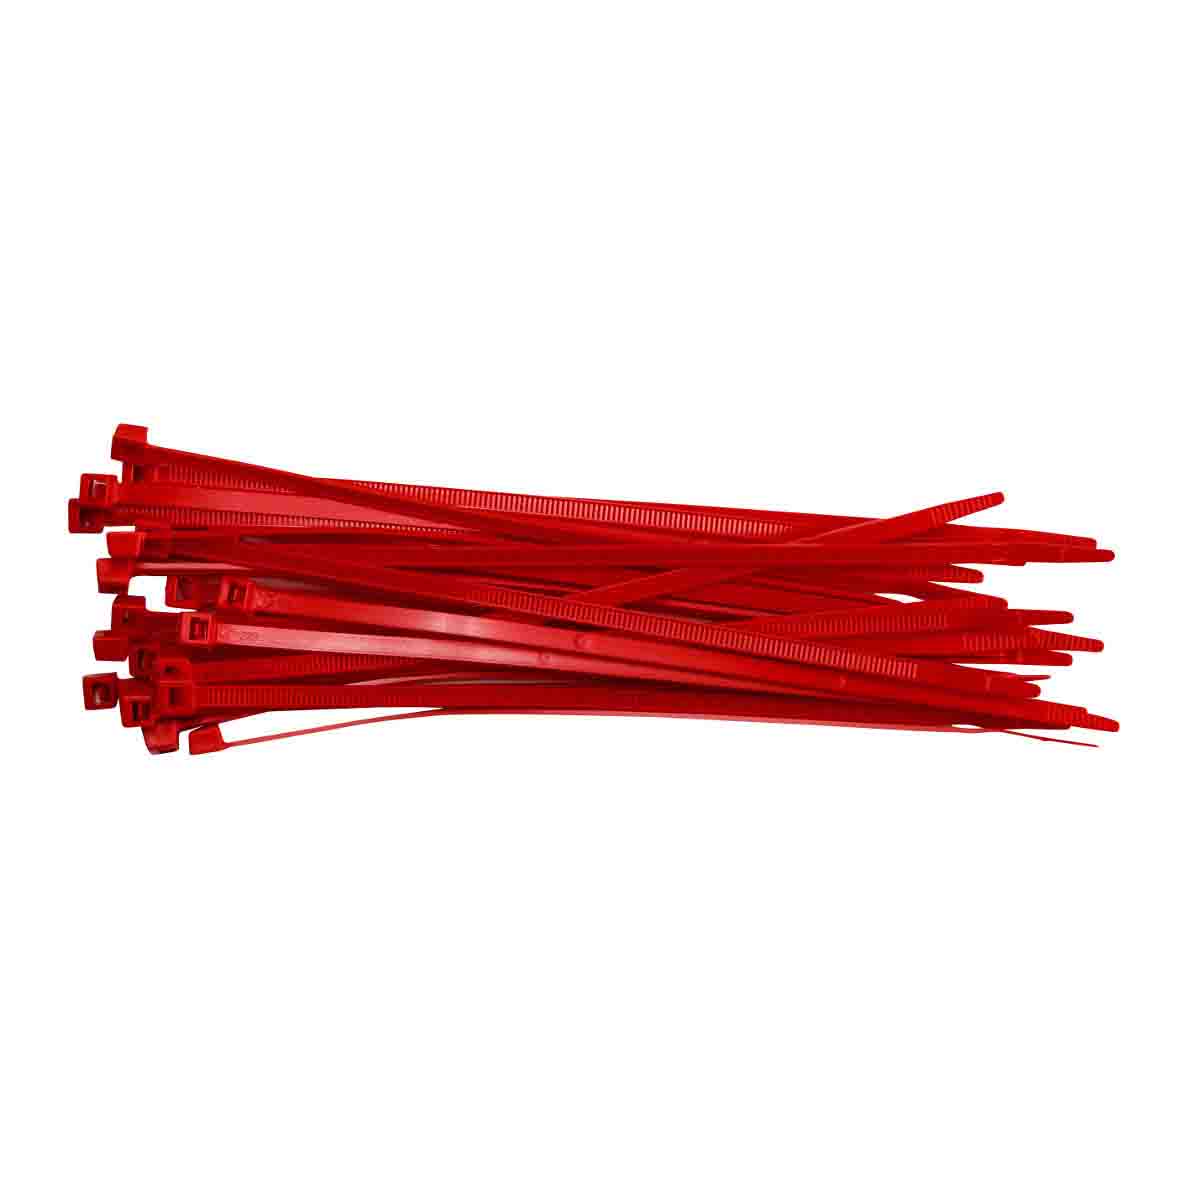 PRINZING RED CABLE TIES FT100 100/BG